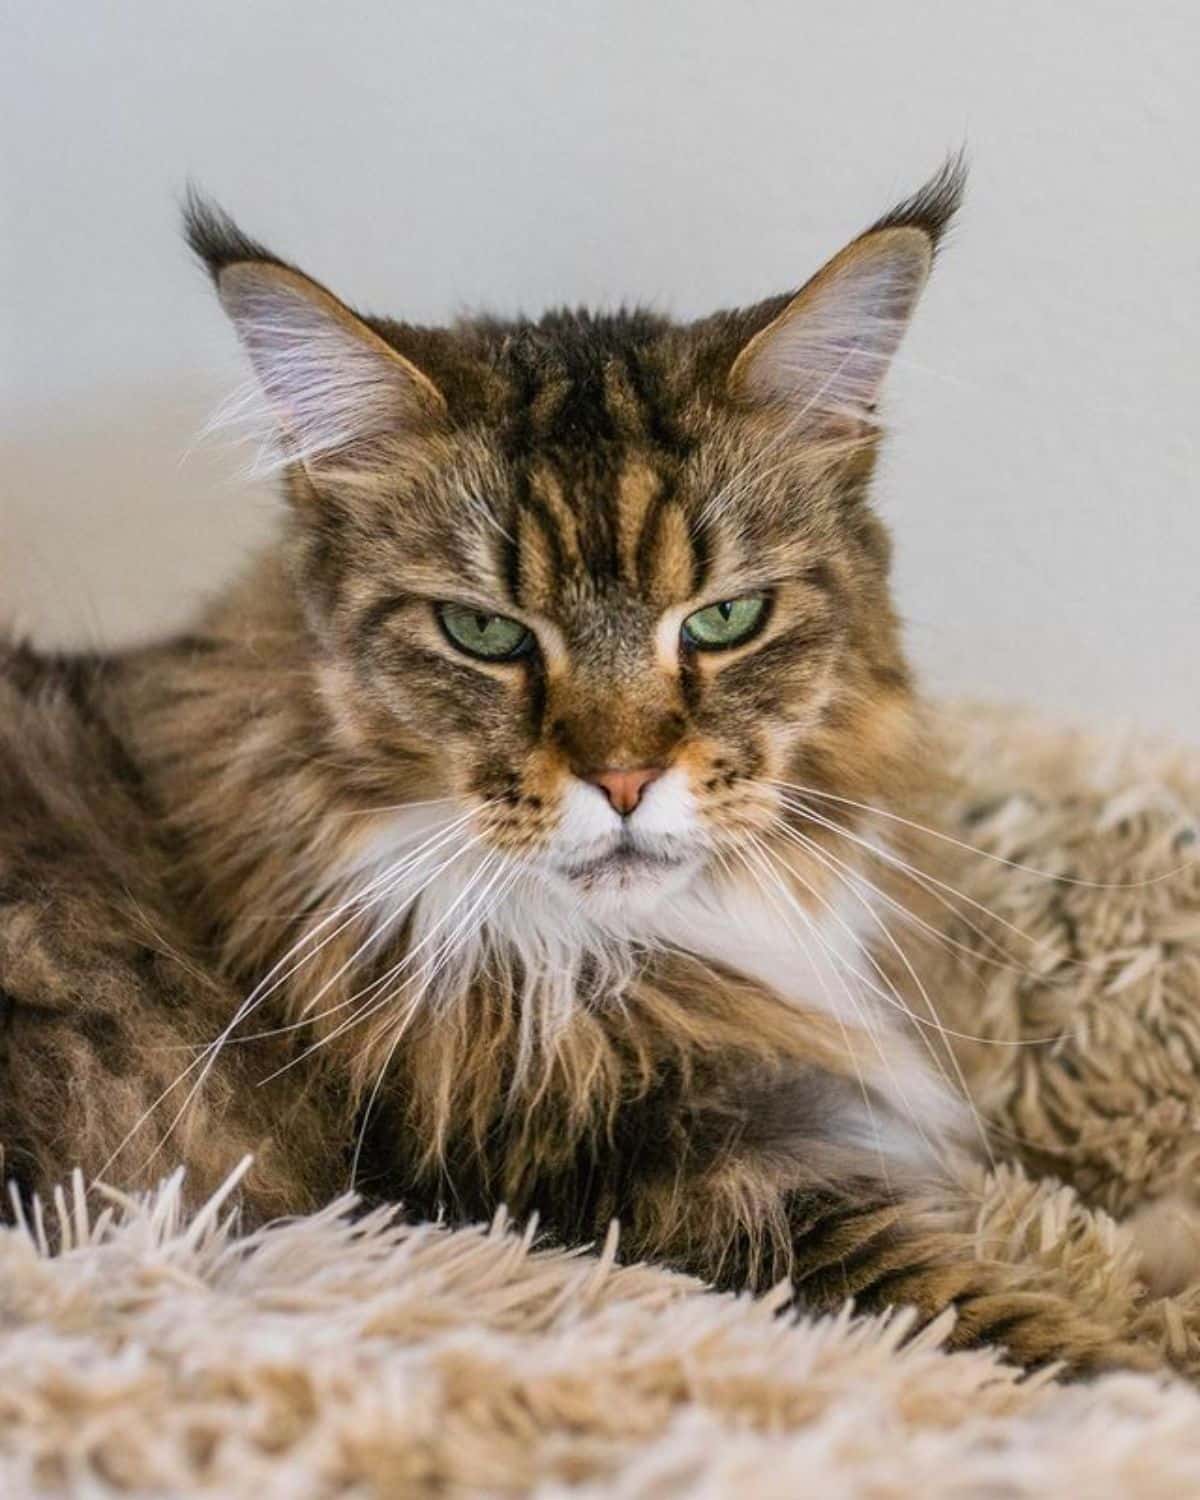 A mean-looking tabby maine coon lying on a fur blnaket.